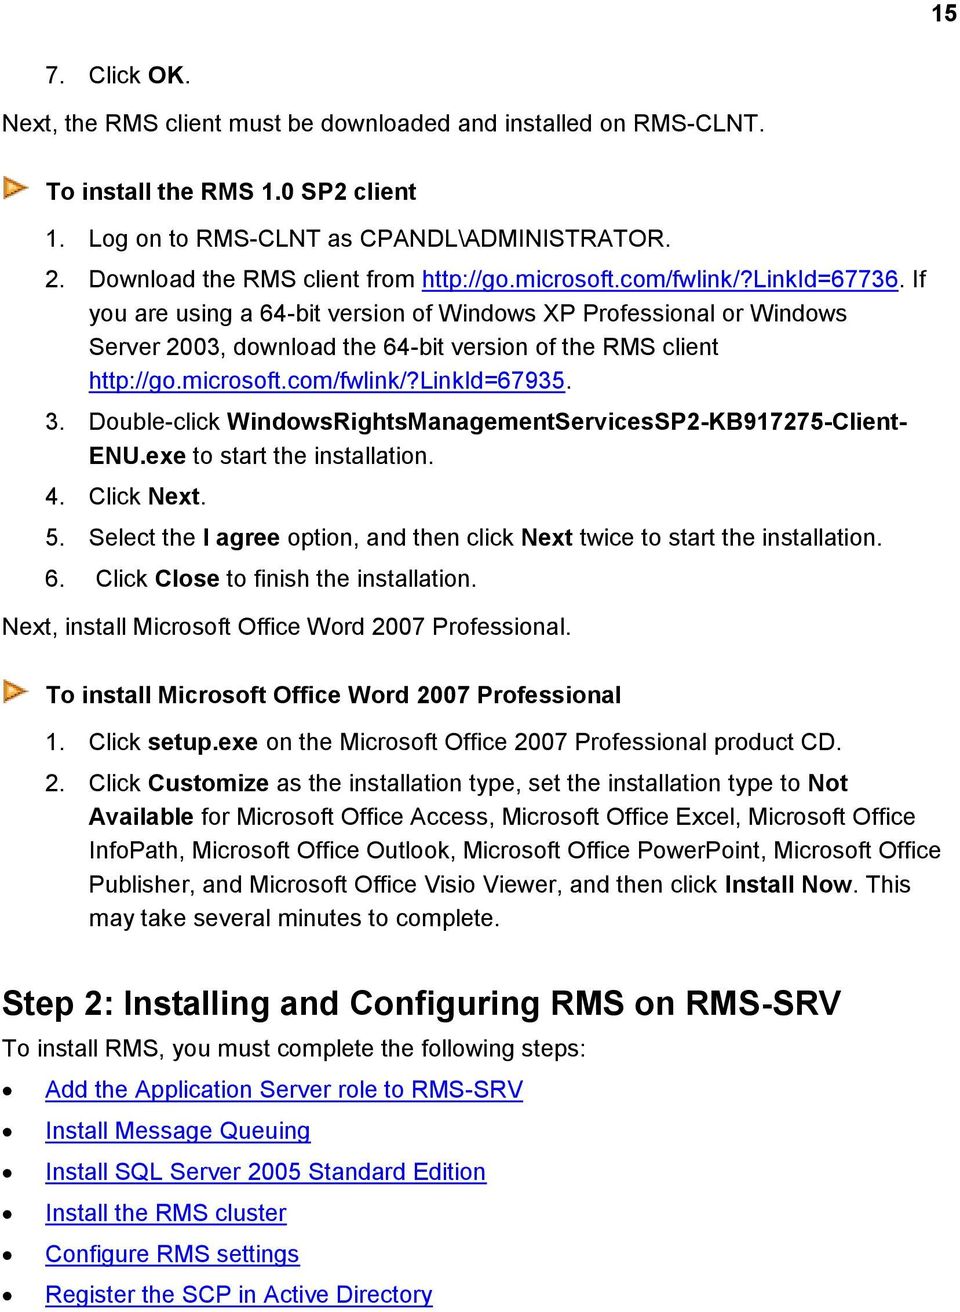 If you are using a 64-bit version of Windows XP Professional or Windows Server 2003, download the 64-bit version of the RMS client http://go.microsoft.com/fwlink/?linkid=67935. 3.